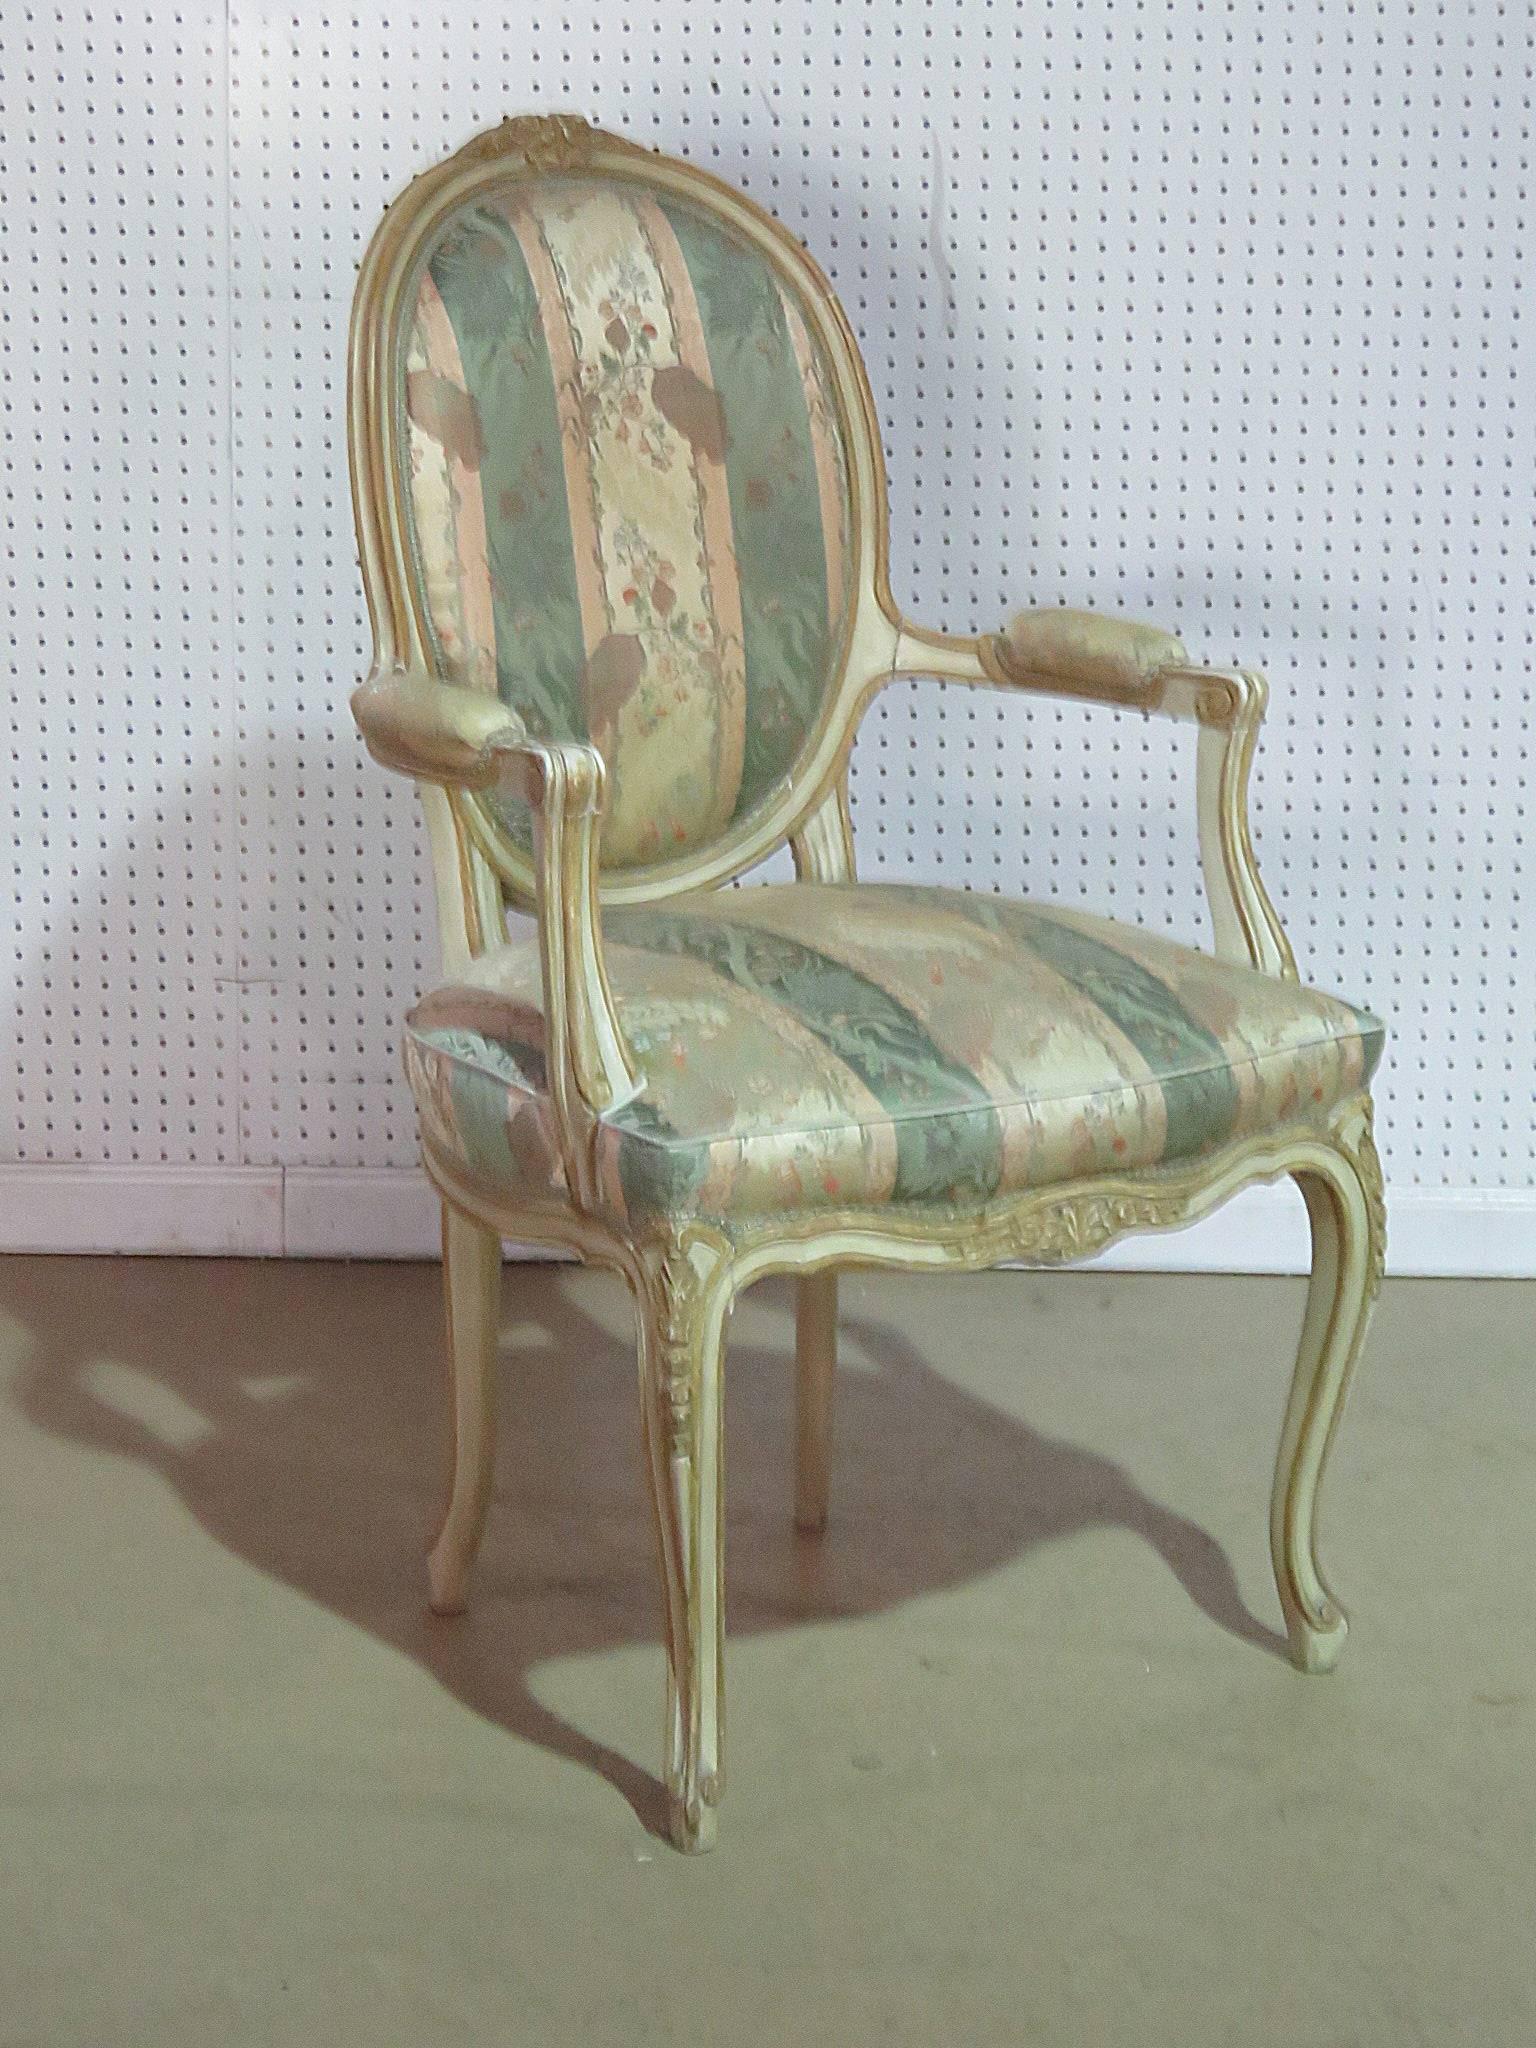 Louis XV style fauteuil by Oscar Shadell, Inc with a carved, distressed paint decorated frame.